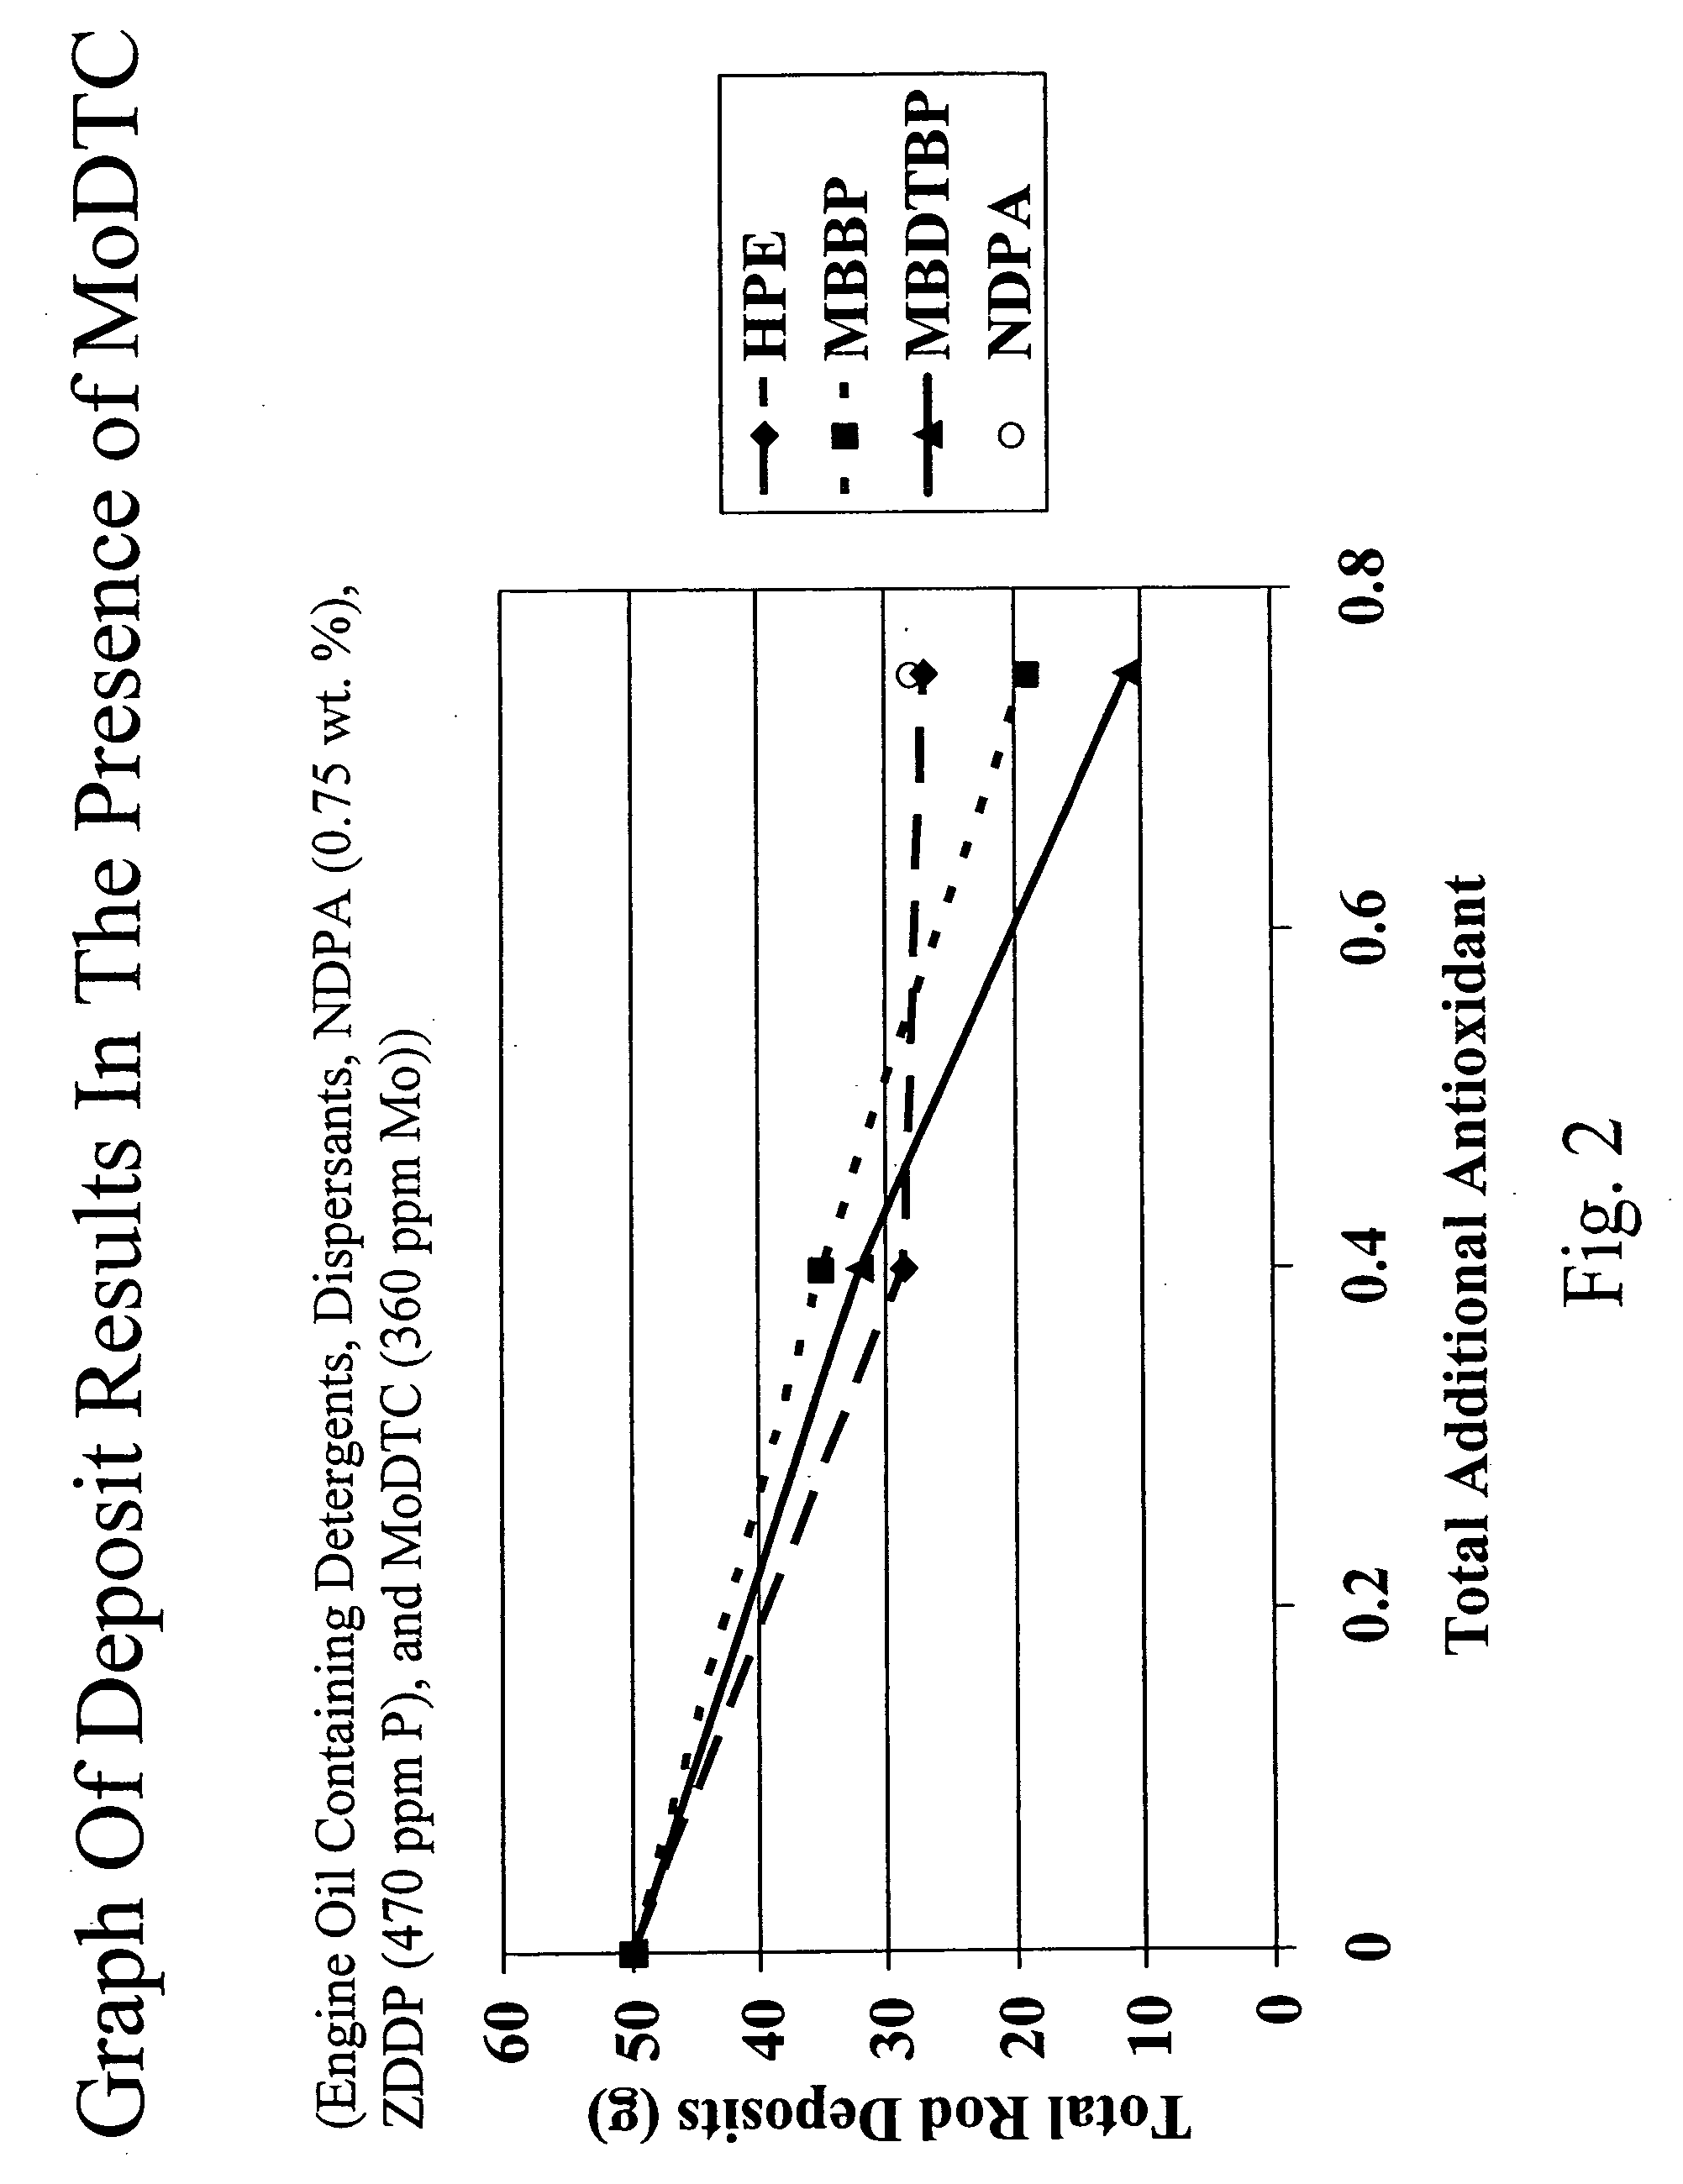 Lubricating oil composition with reduced phosphorus levels